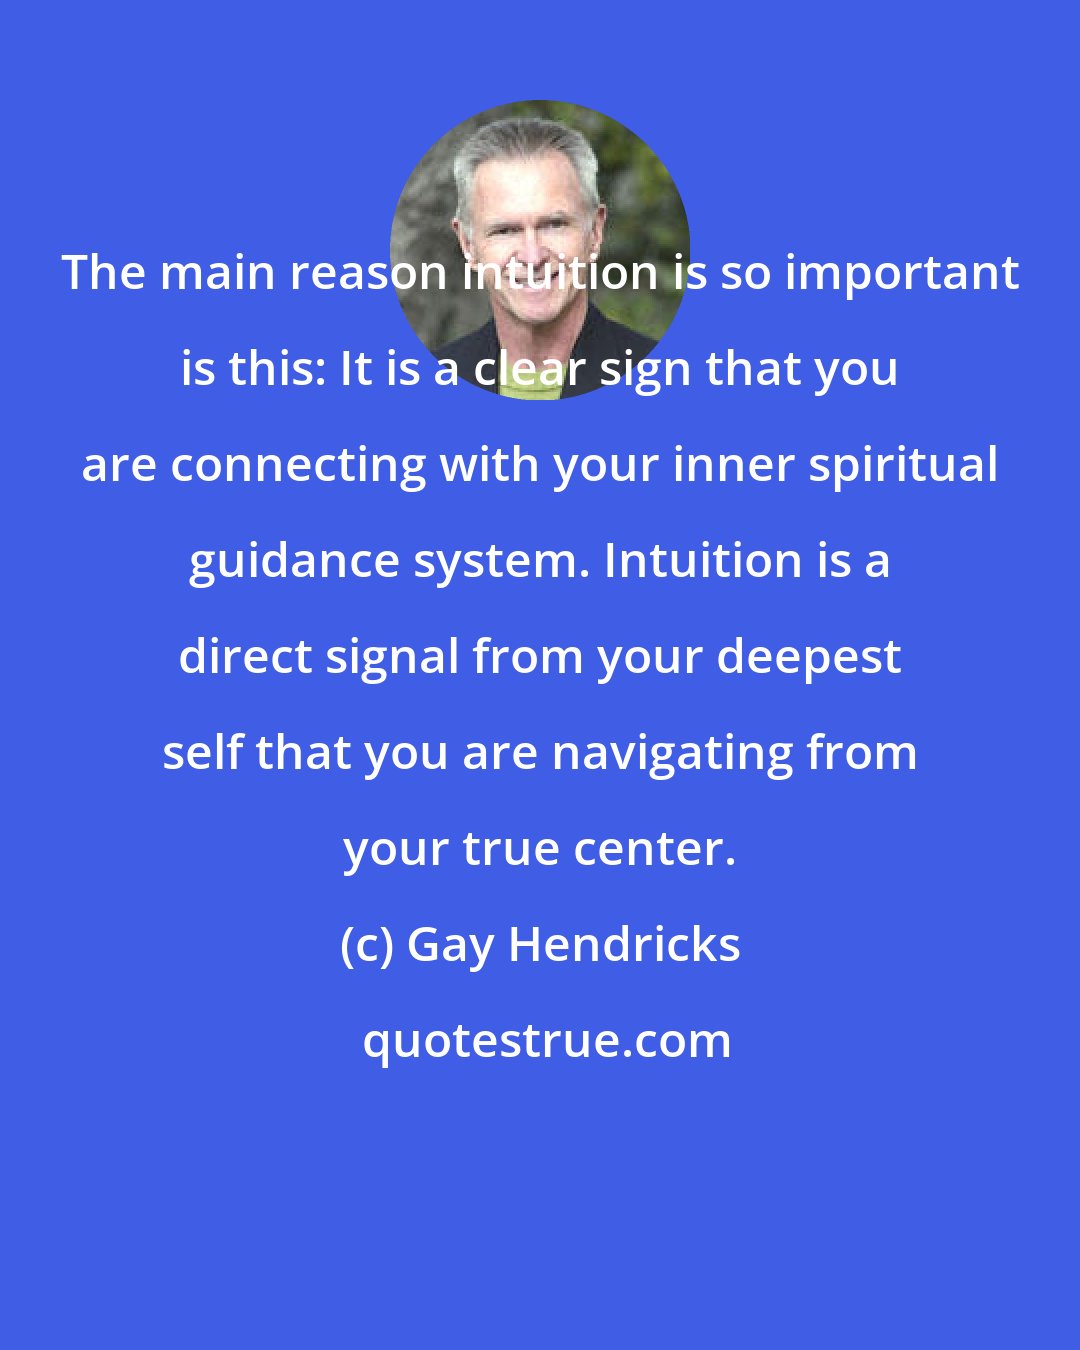 Gay Hendricks: The main reason intuition is so important is this: It is a clear sign that you are connecting with your inner spiritual guidance system. Intuition is a direct signal from your deepest self that you are navigating from your true center.